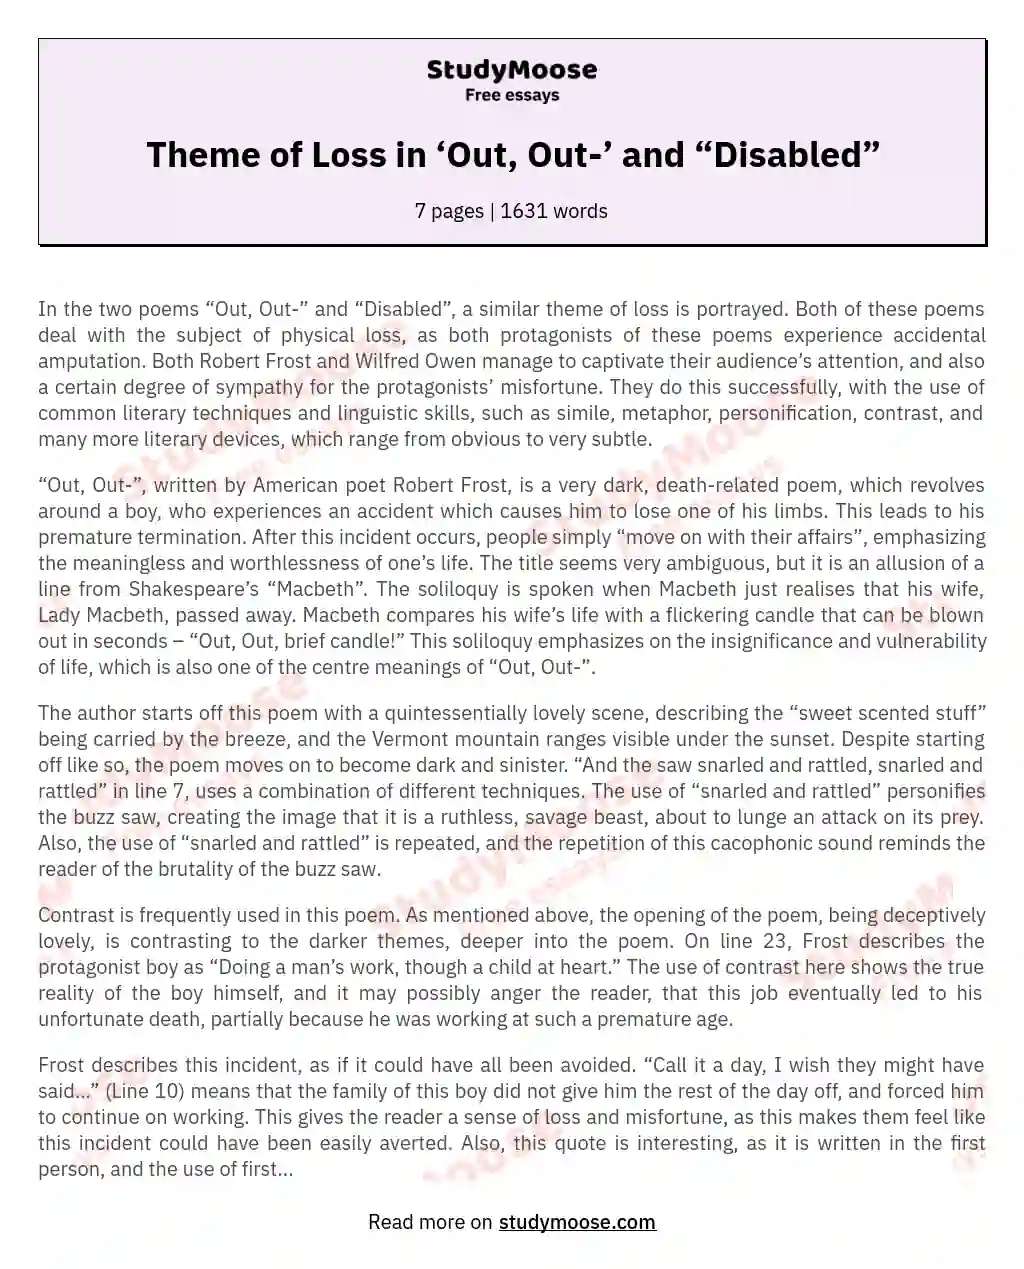 Theme of Loss in ‘Out, Out-’ and “Disabled”